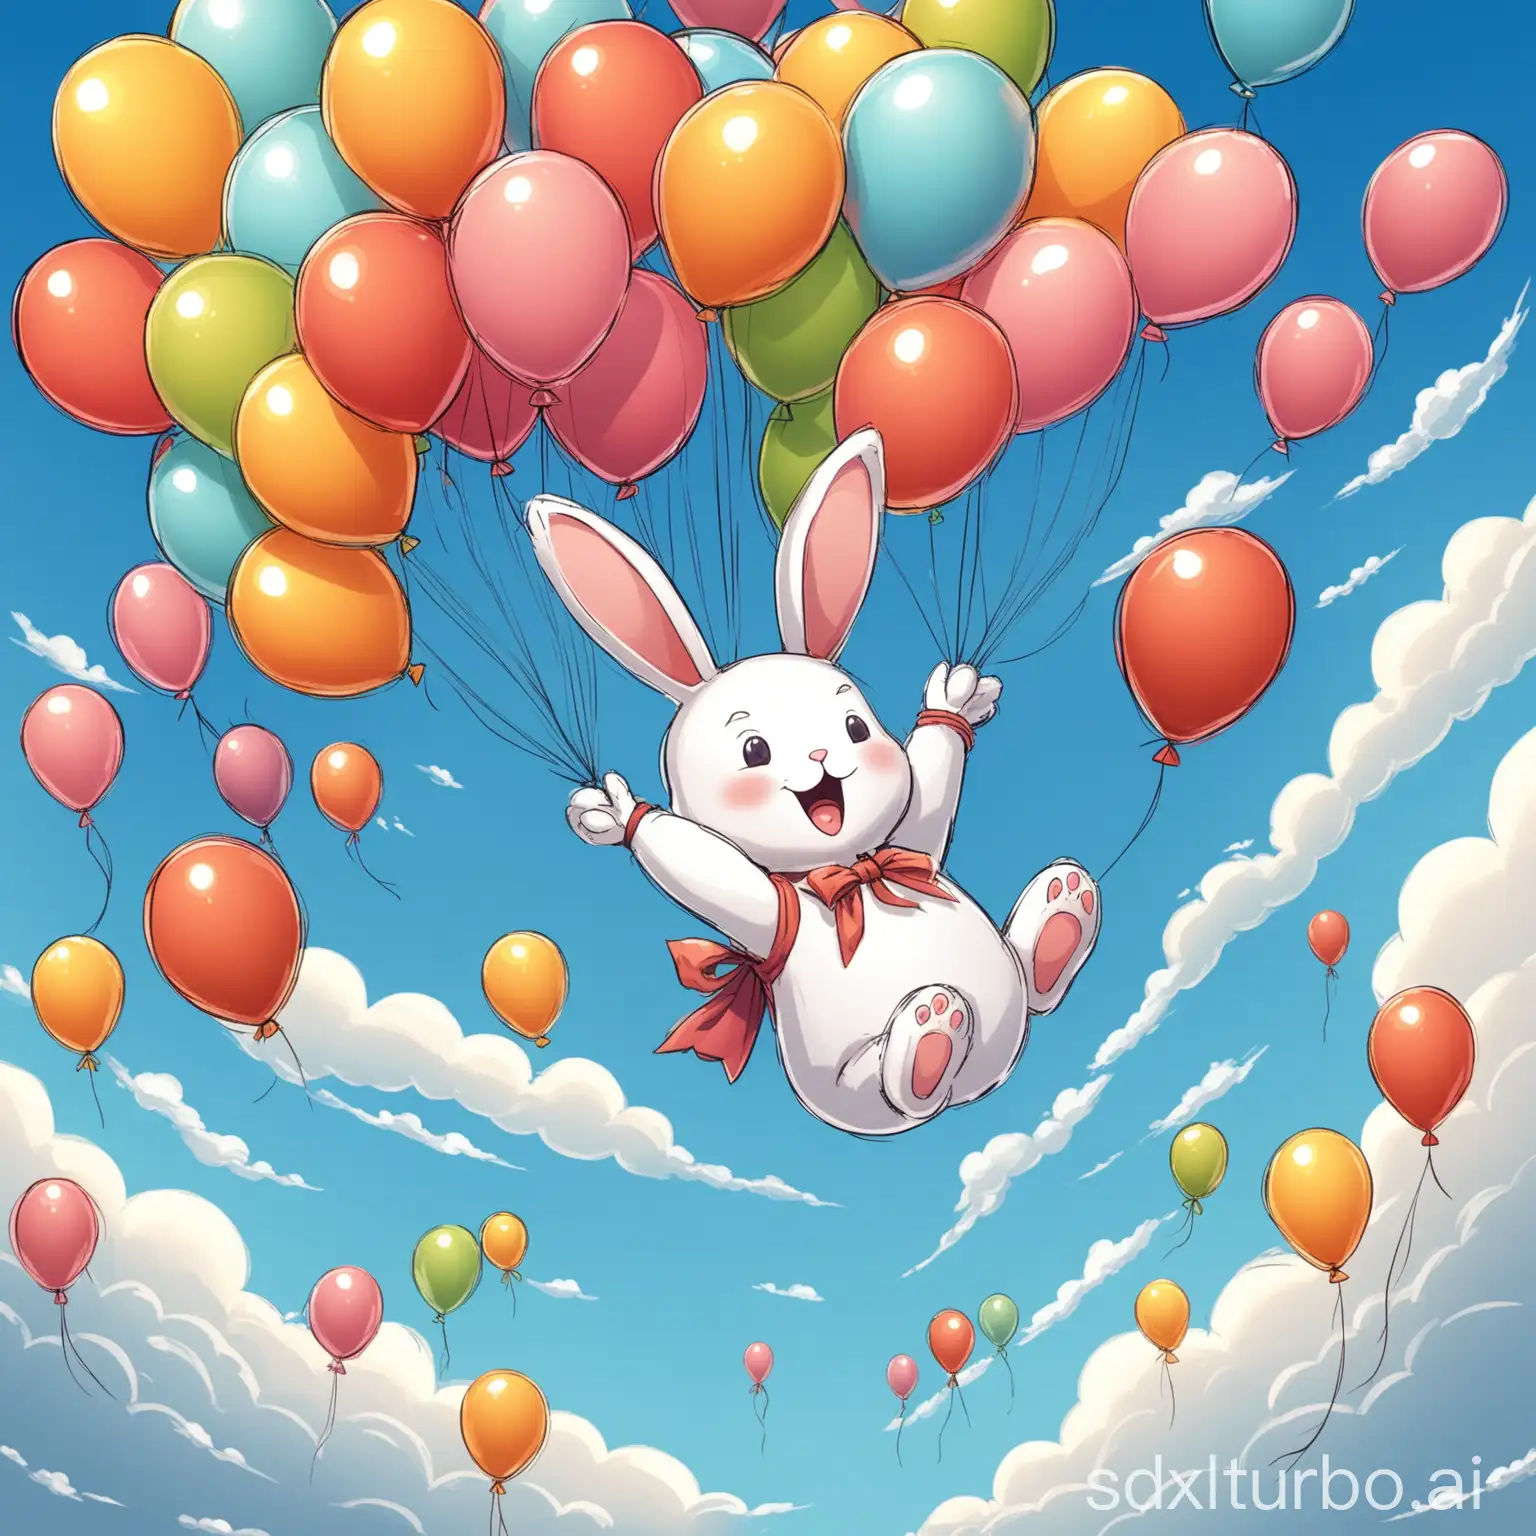 Cartoon-Rabbit-Flying-with-Colorful-Balloons-in-Sky